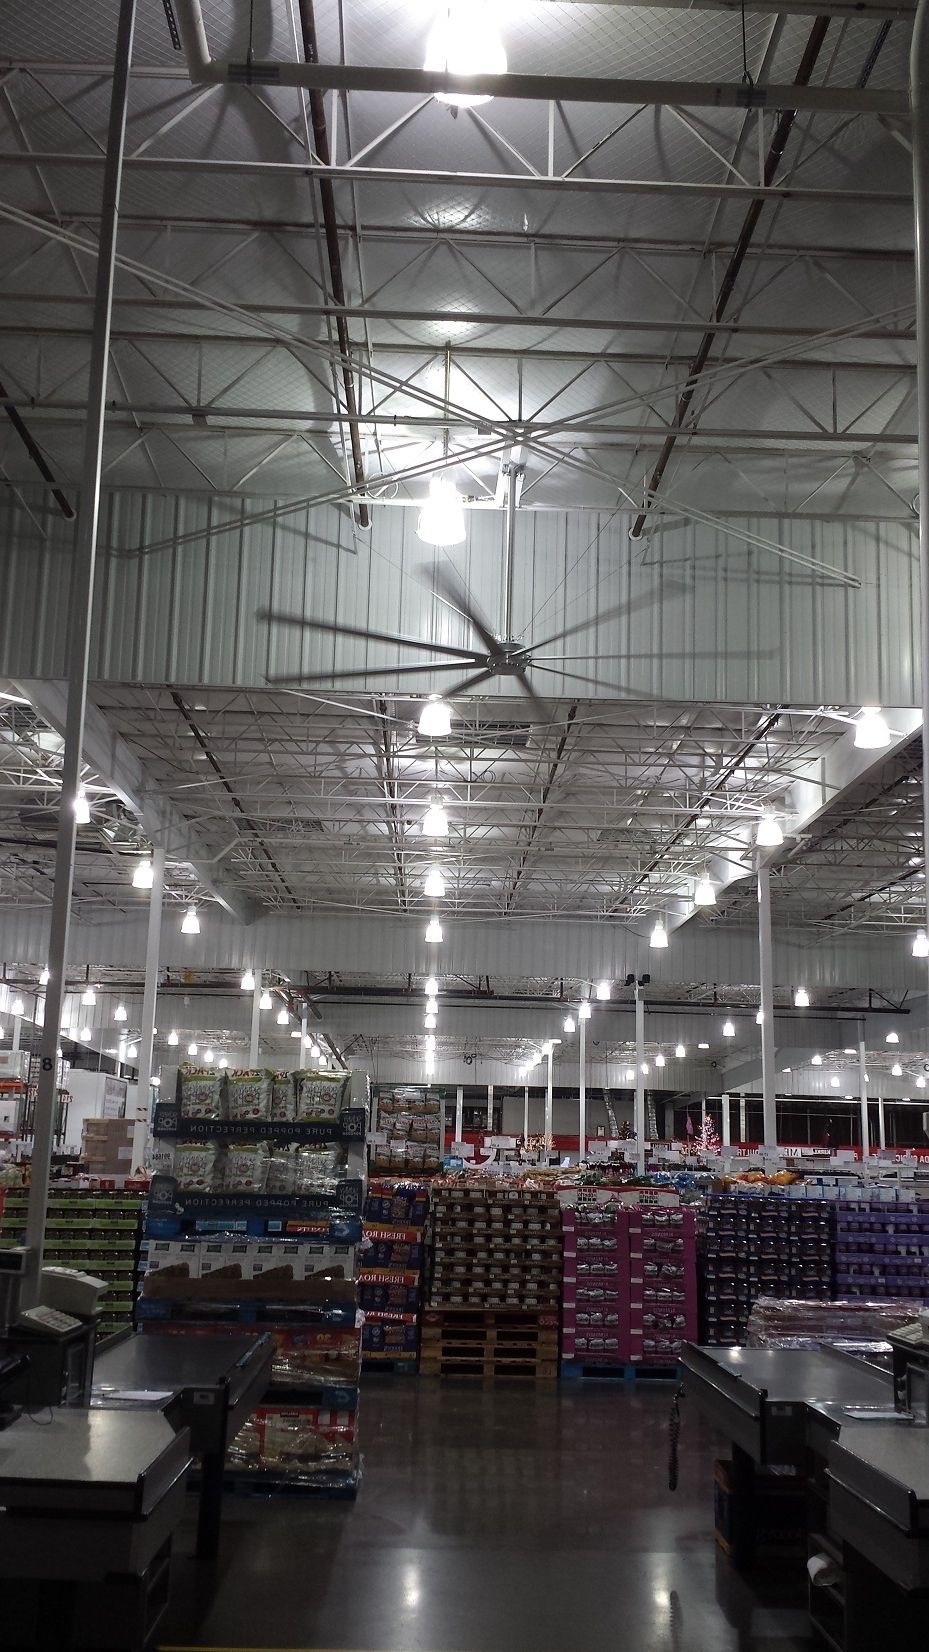 2019 Outdoor Ceiling Fans At Costco Throughout Ceiling Fan: Astounding Costco Ceiling Fans For Home Hunter Ceiling (View 5 of 20)